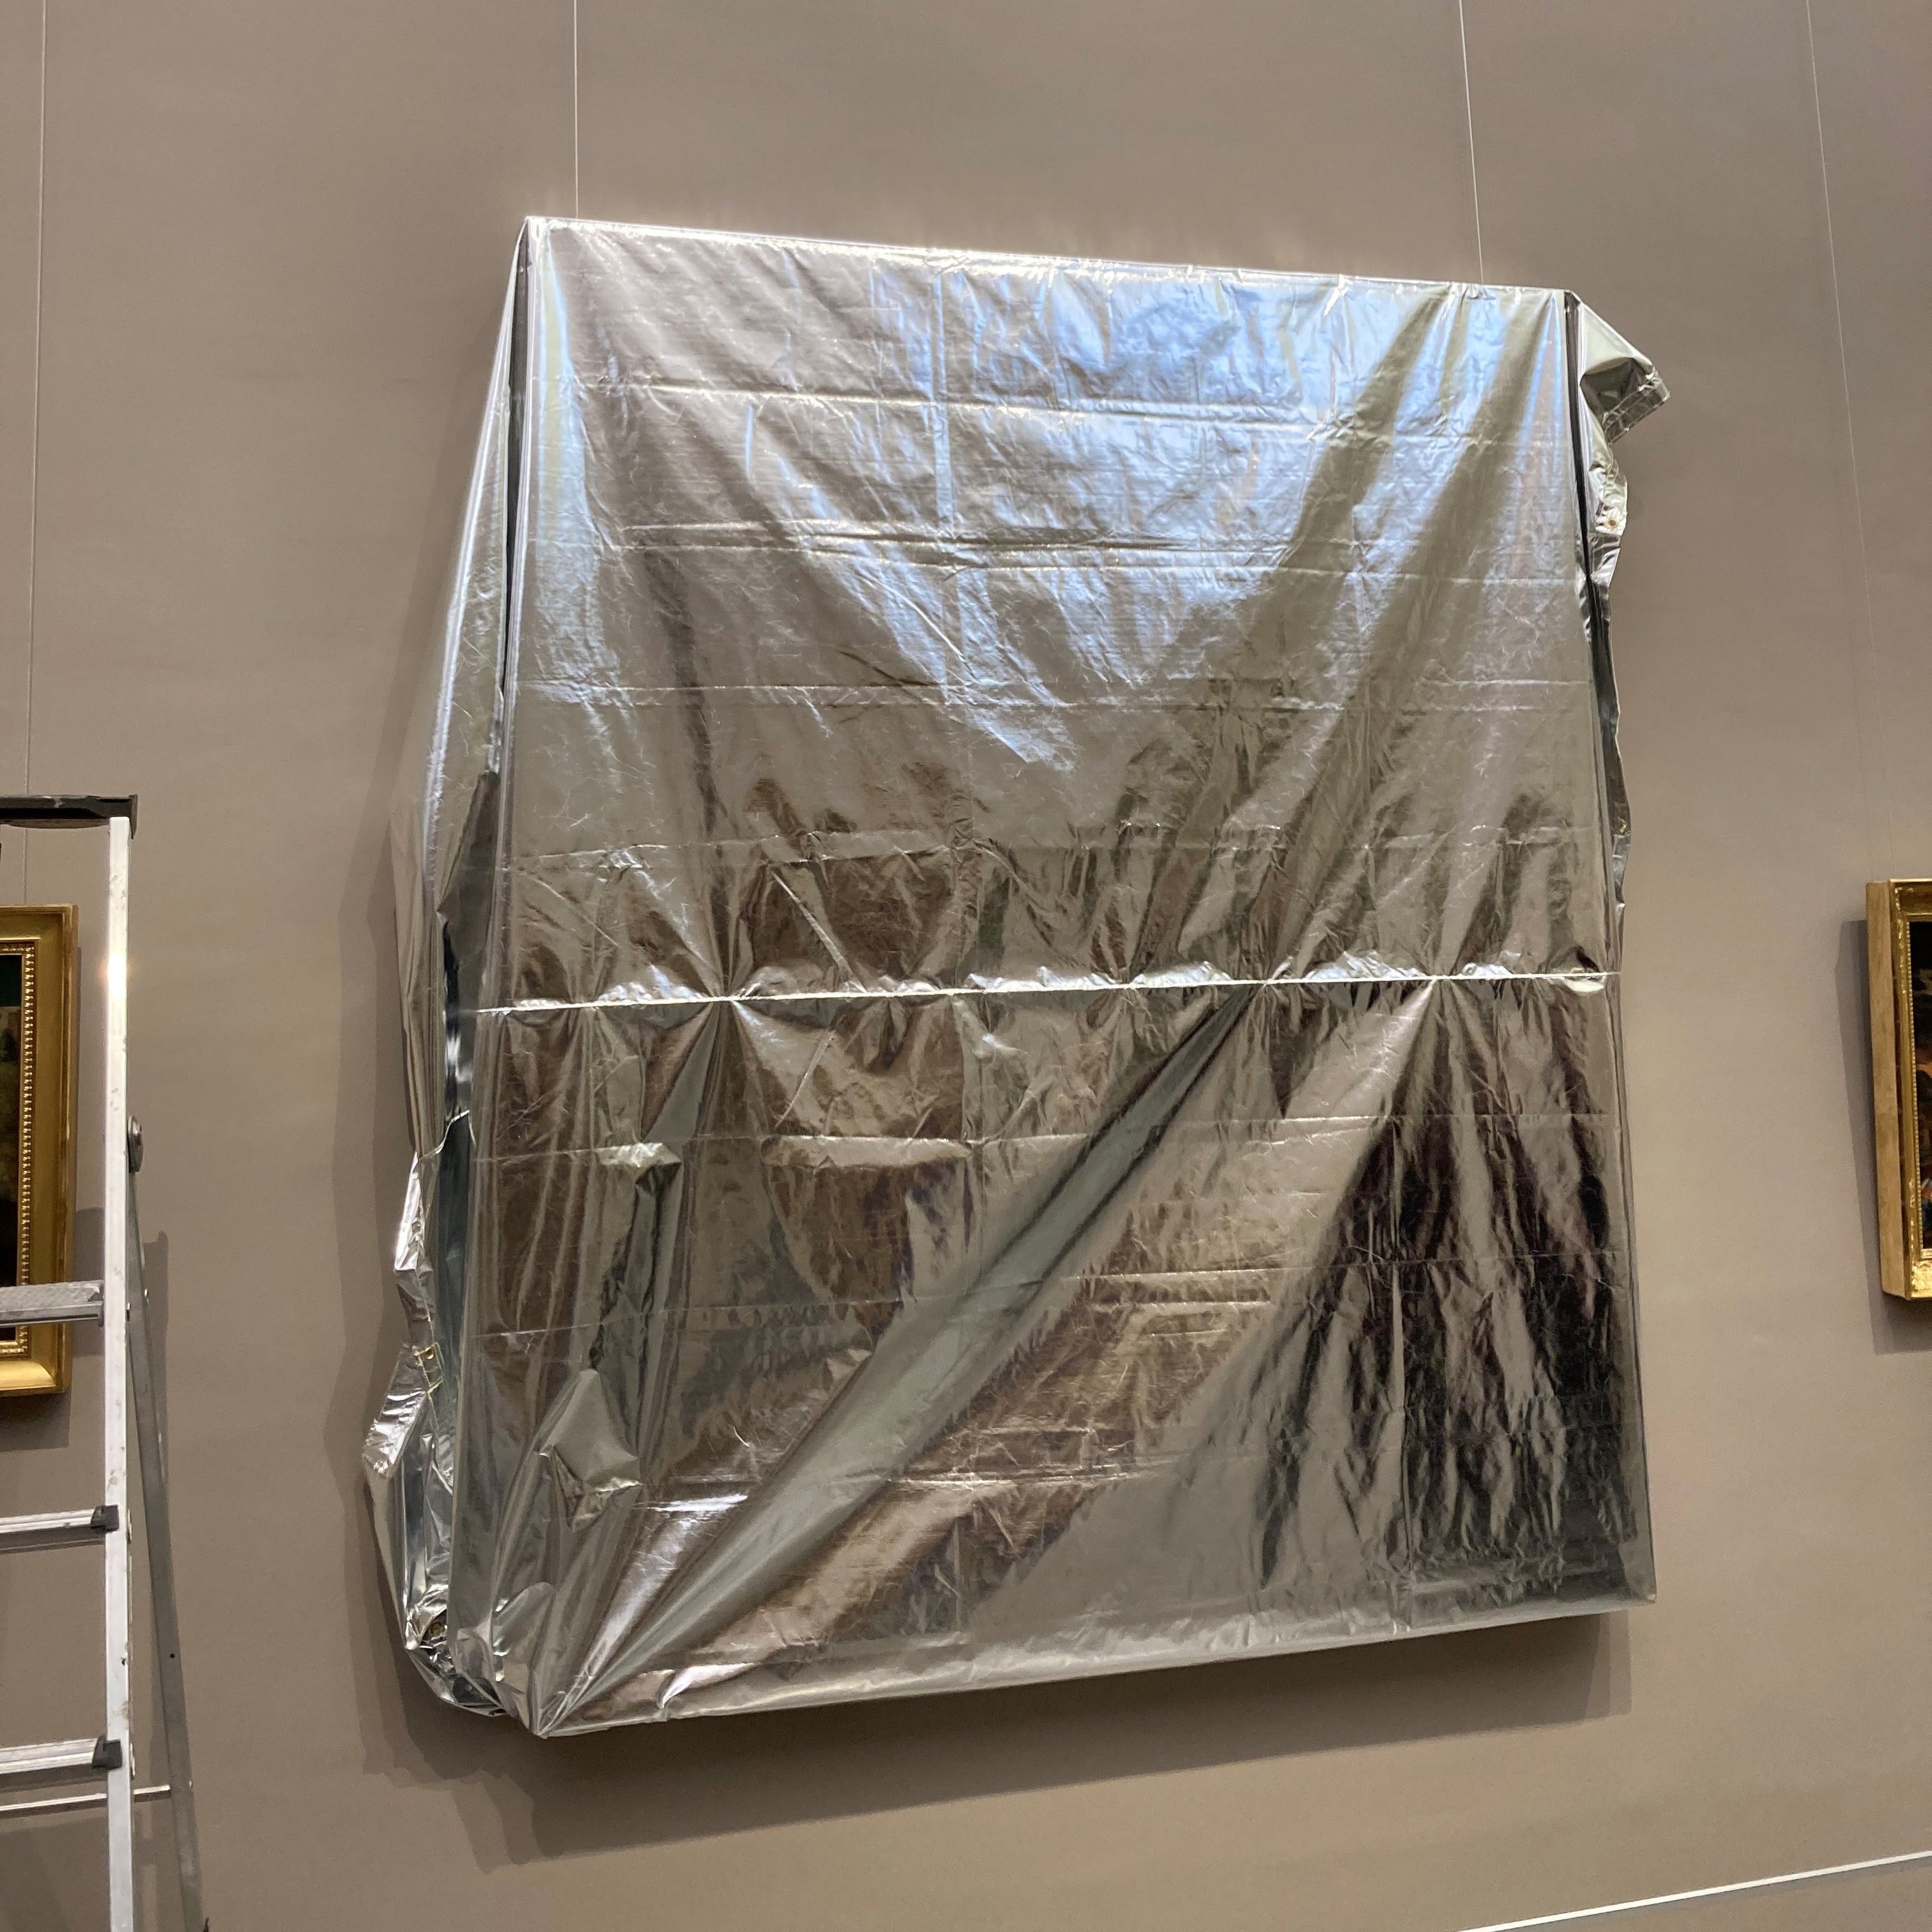 Fireguard radiant heat cover protecting a painting against fire in a museum